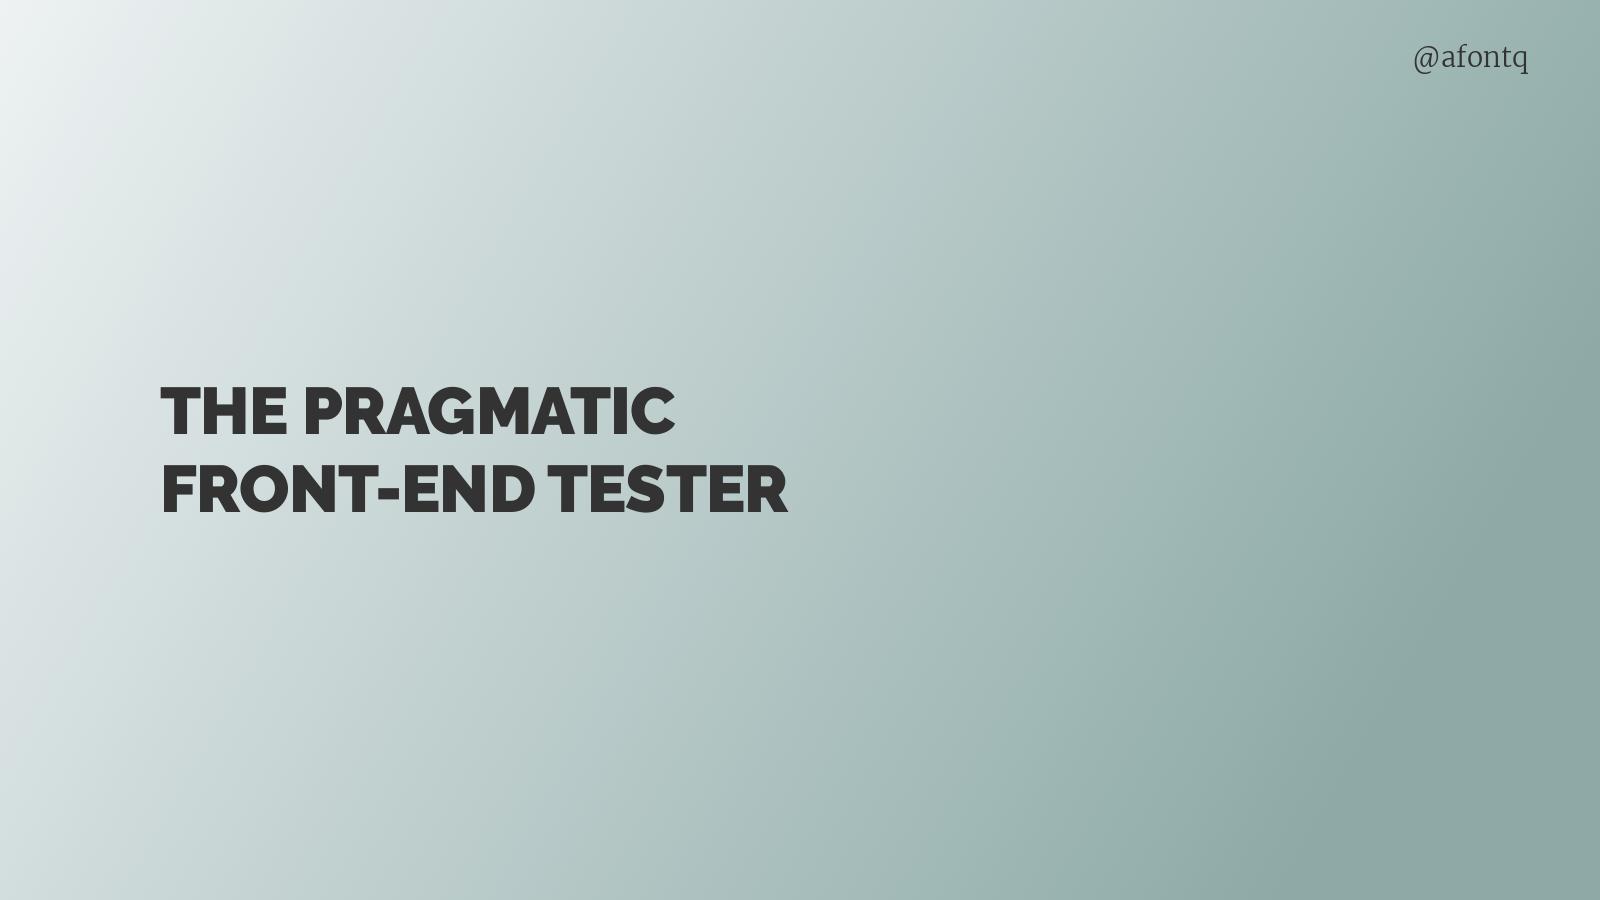 The pragmatic front-end tester